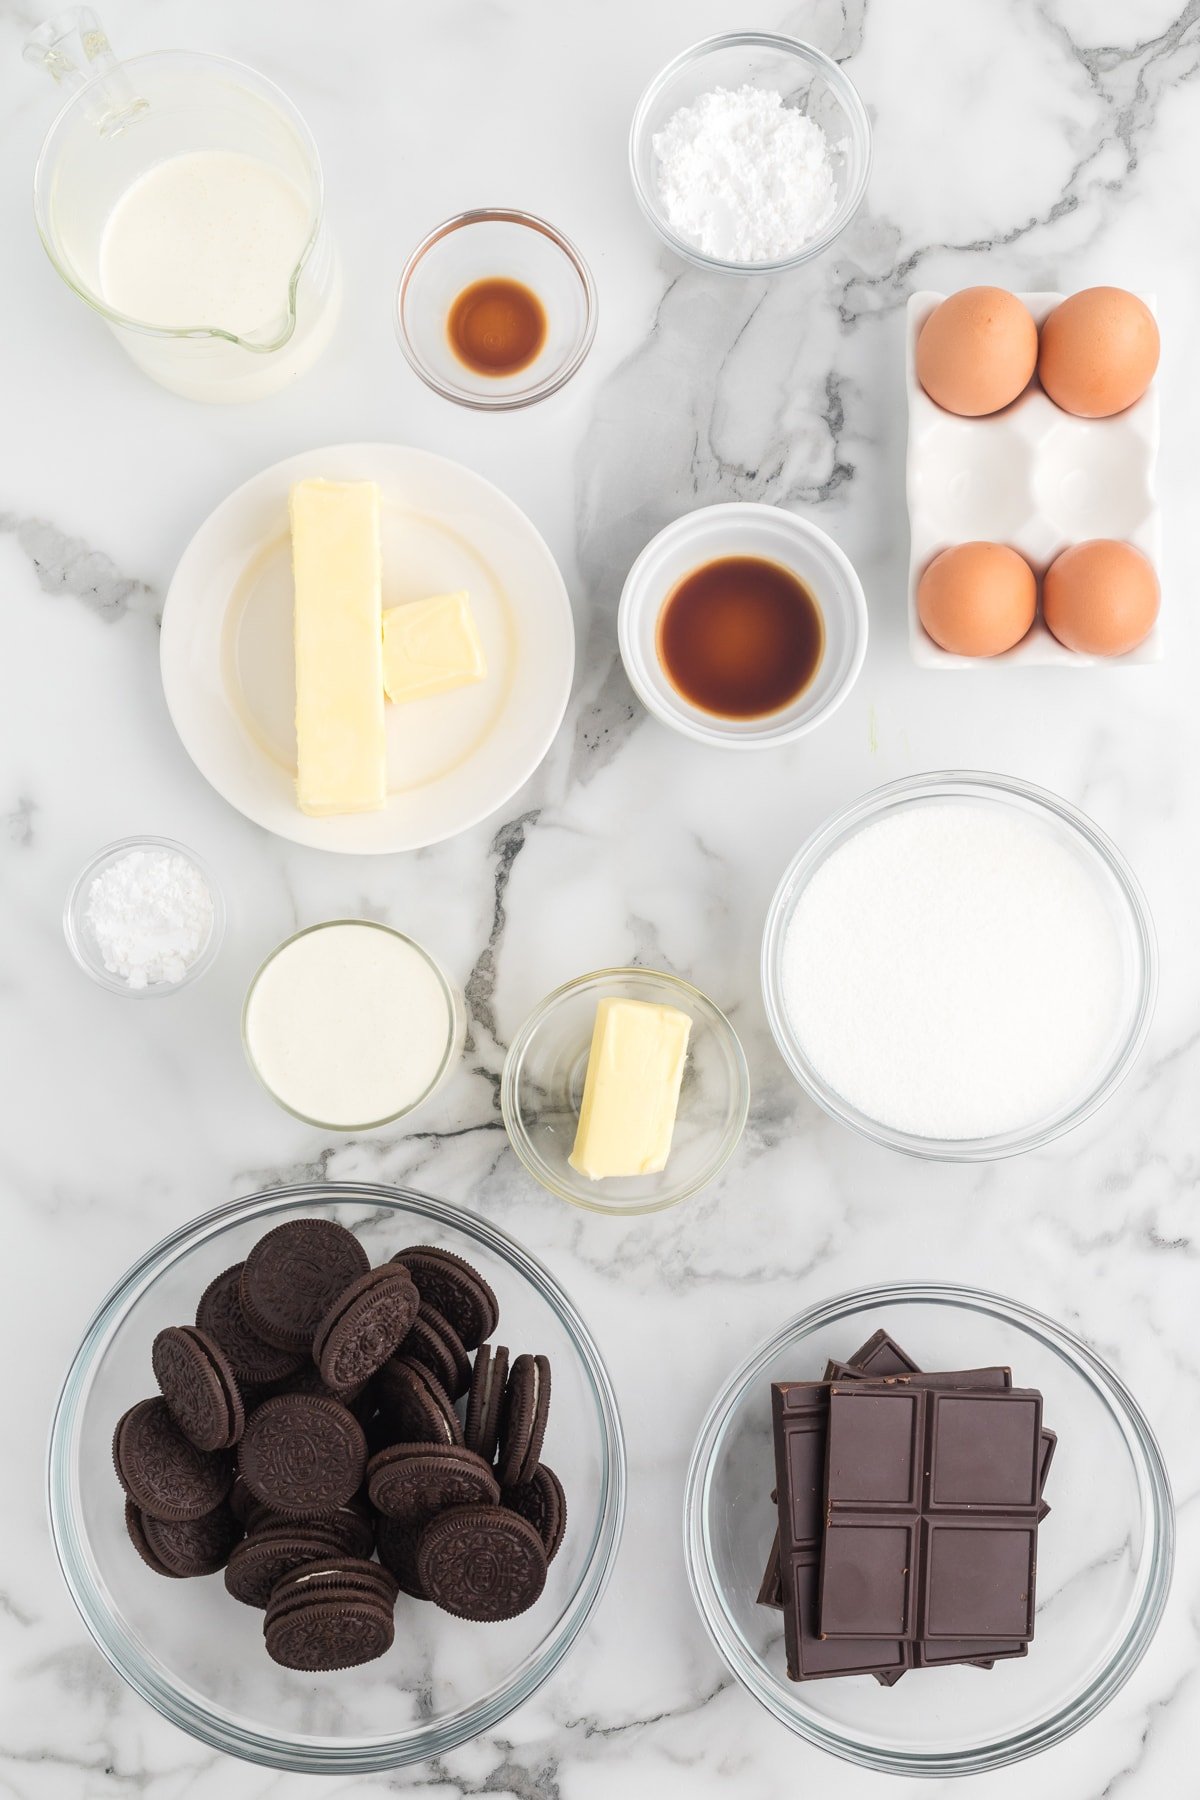 Overhead view of French silk pie ingredients